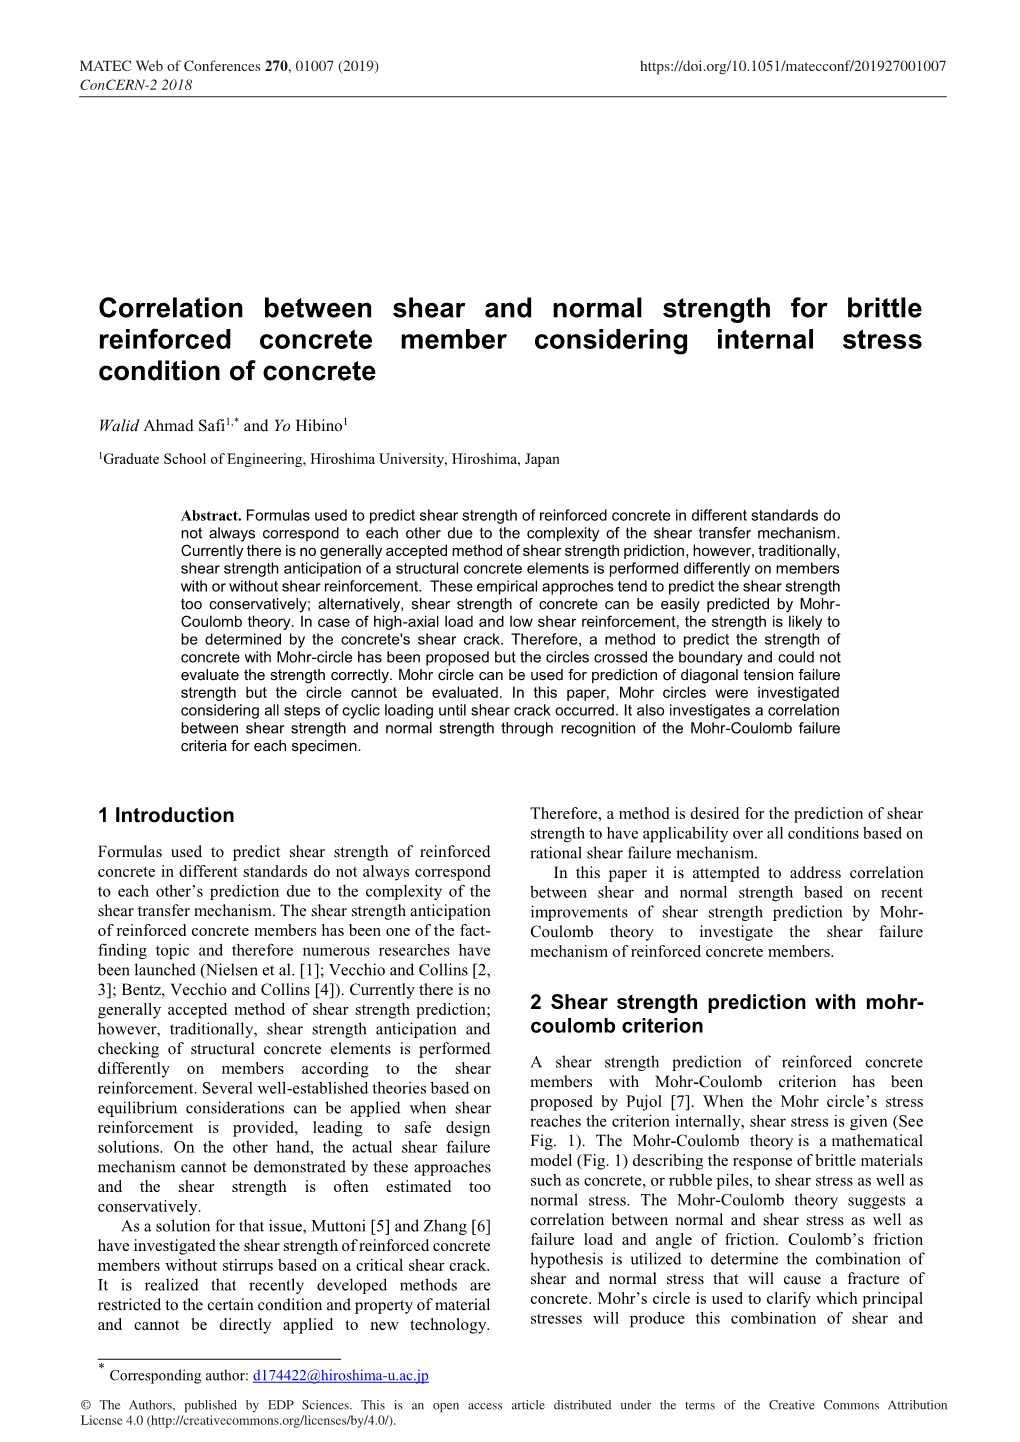 Correlation Between Shear and Normal Strength for Brittle Reinforced Concrete Member Considering Internal Stress Condition of Concrete